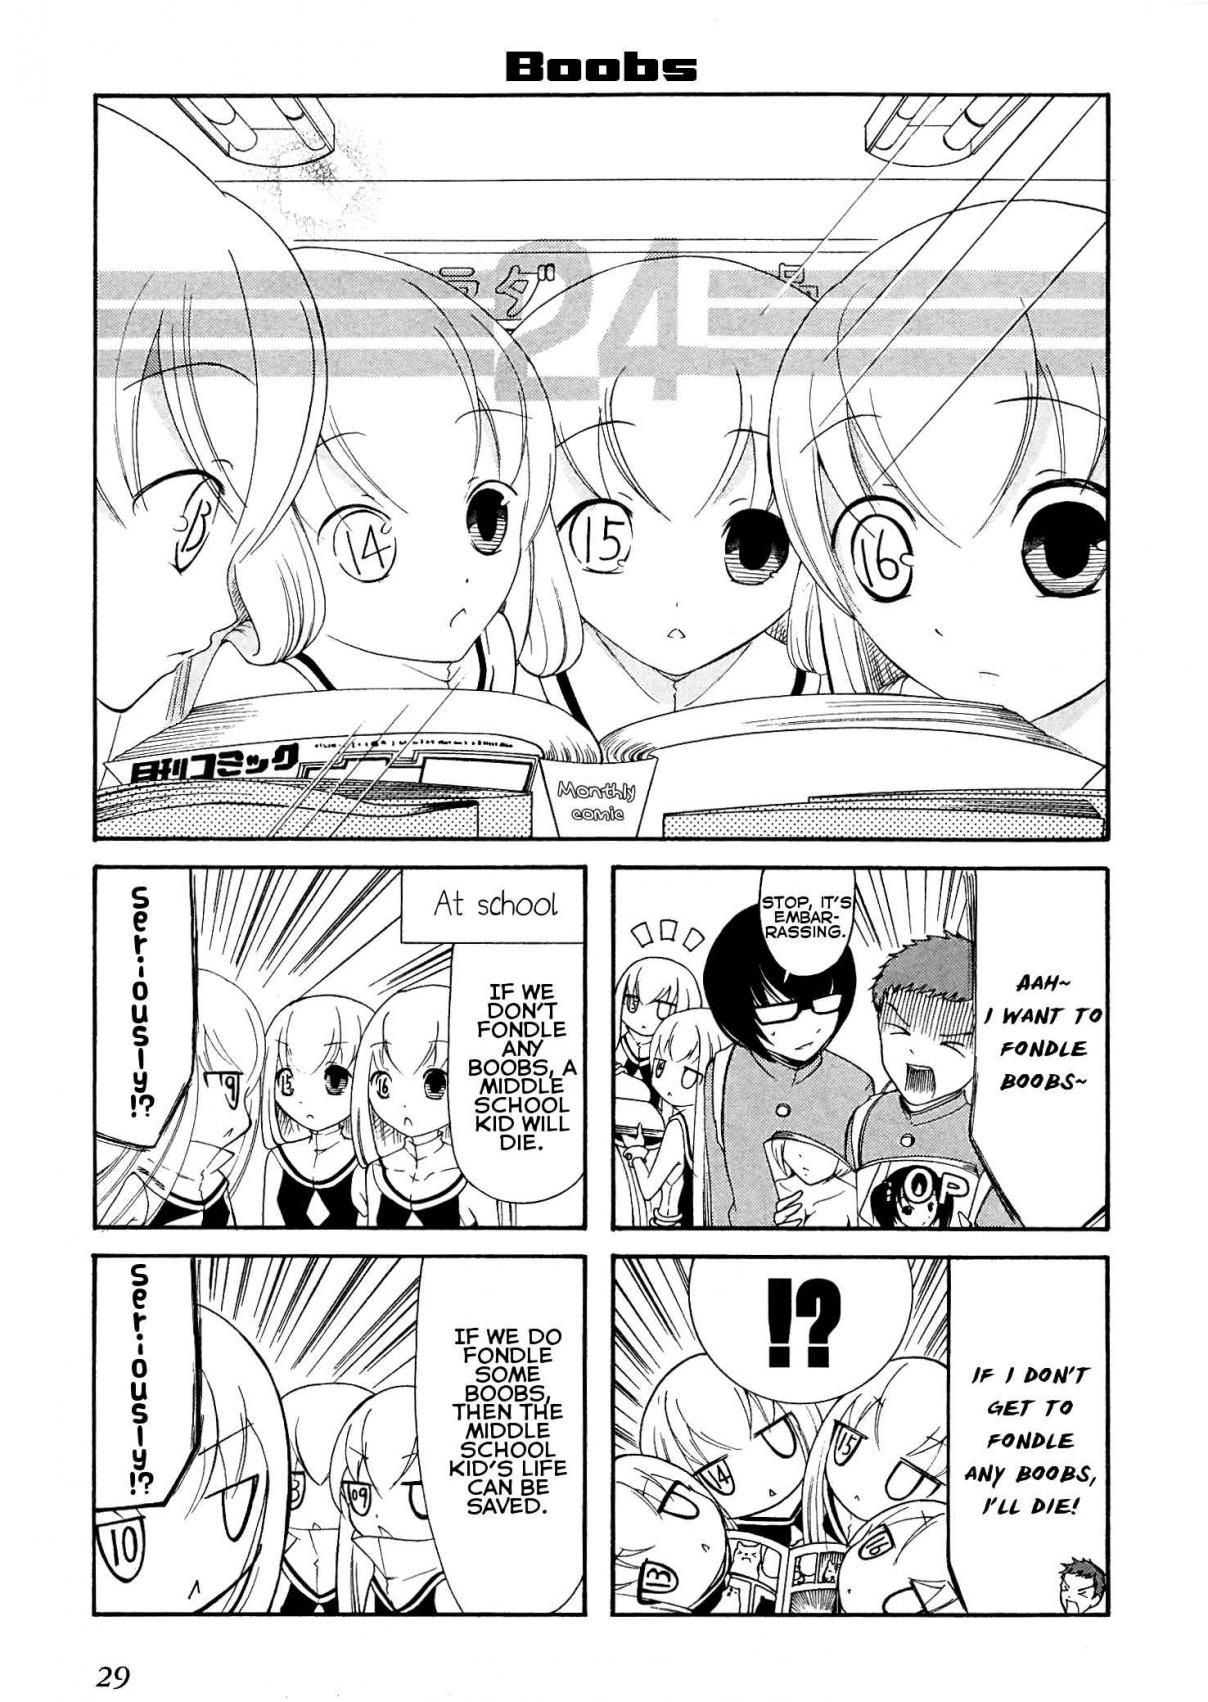 Number Girl Vol. 1 Ch. 4